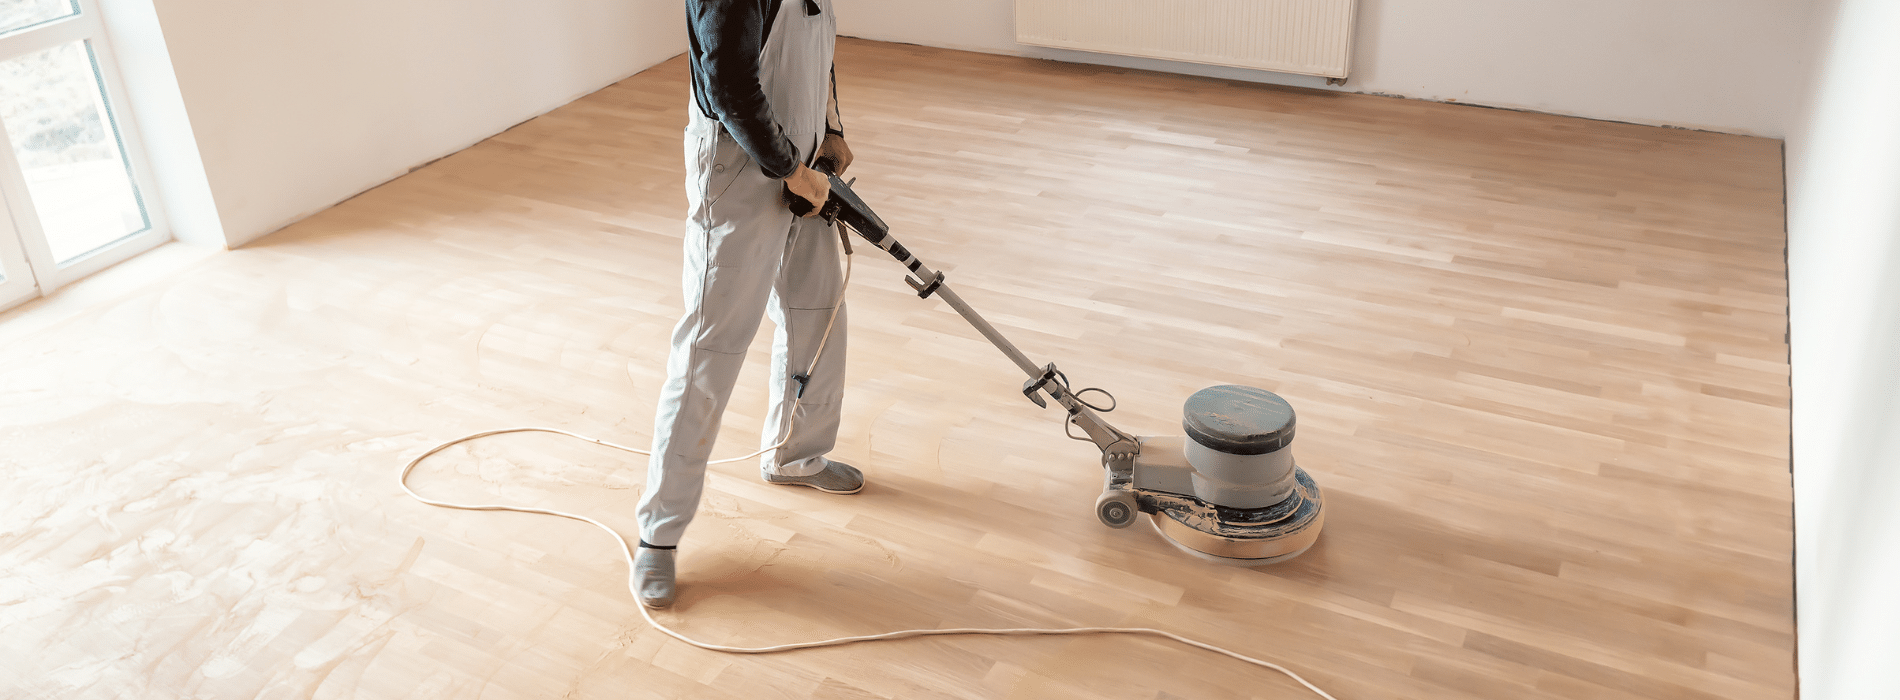 Mr Sander® are using a Bona FlexiSand 1.9, a powerful buffer sander with a Ø 407 mm dimension, 1.9 kW effect, and 230 V voltage. The sander is connected to a dust extraction system with a HEPA filter, ensuring a clean and efficient result while sanding the parquet floor. 